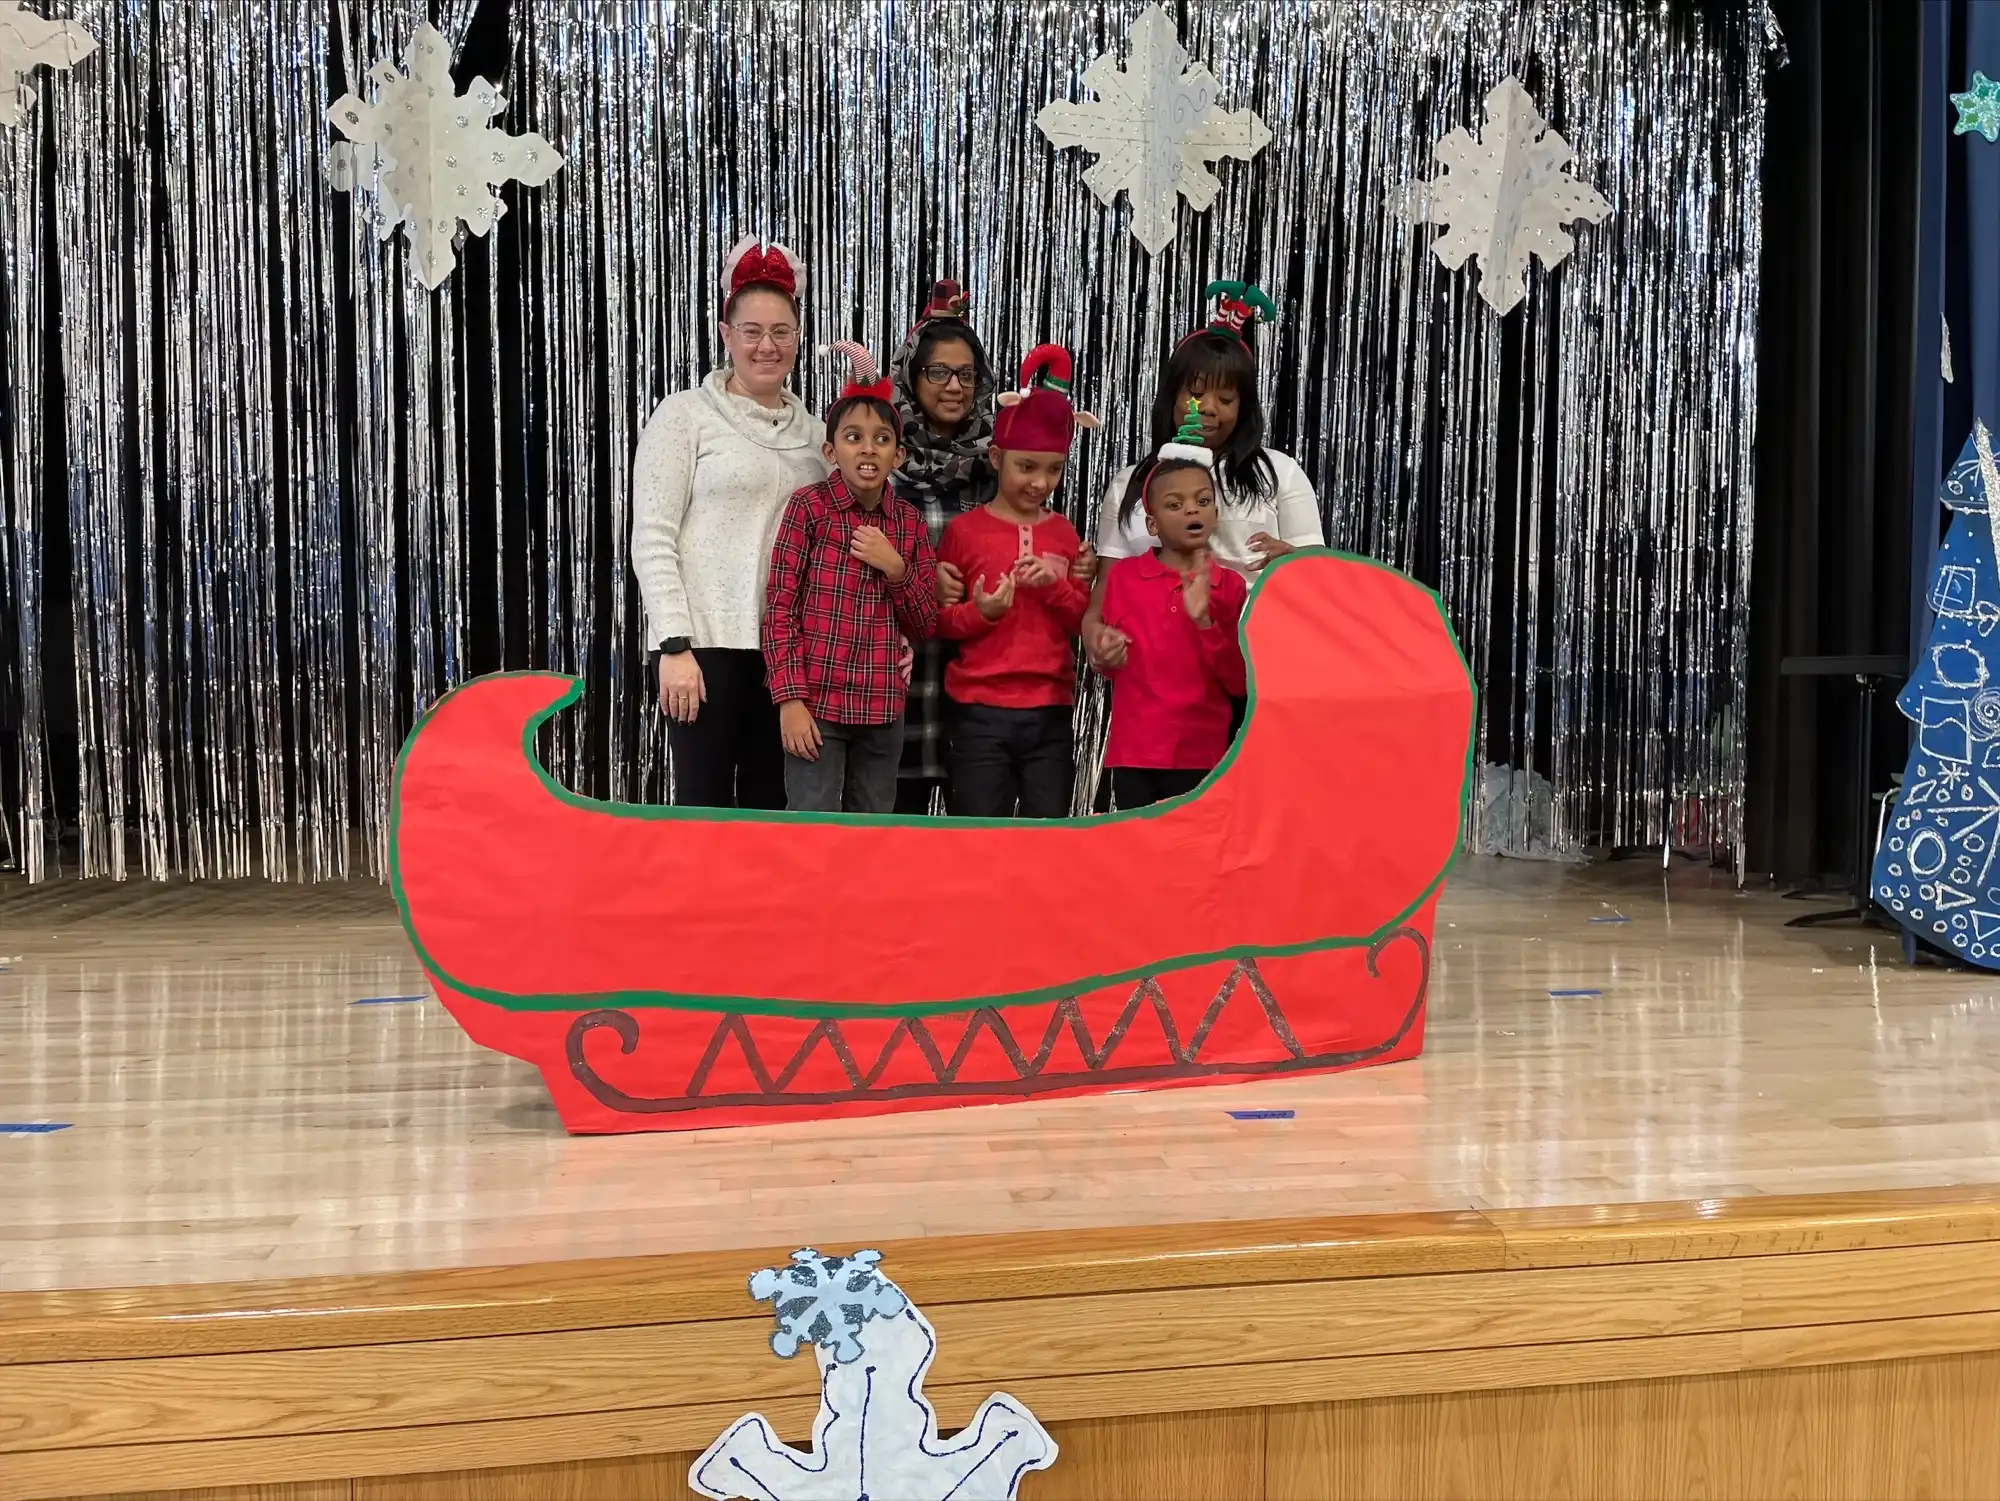 3 students and 3 teachers next to a cardboard red sleigh on stage.